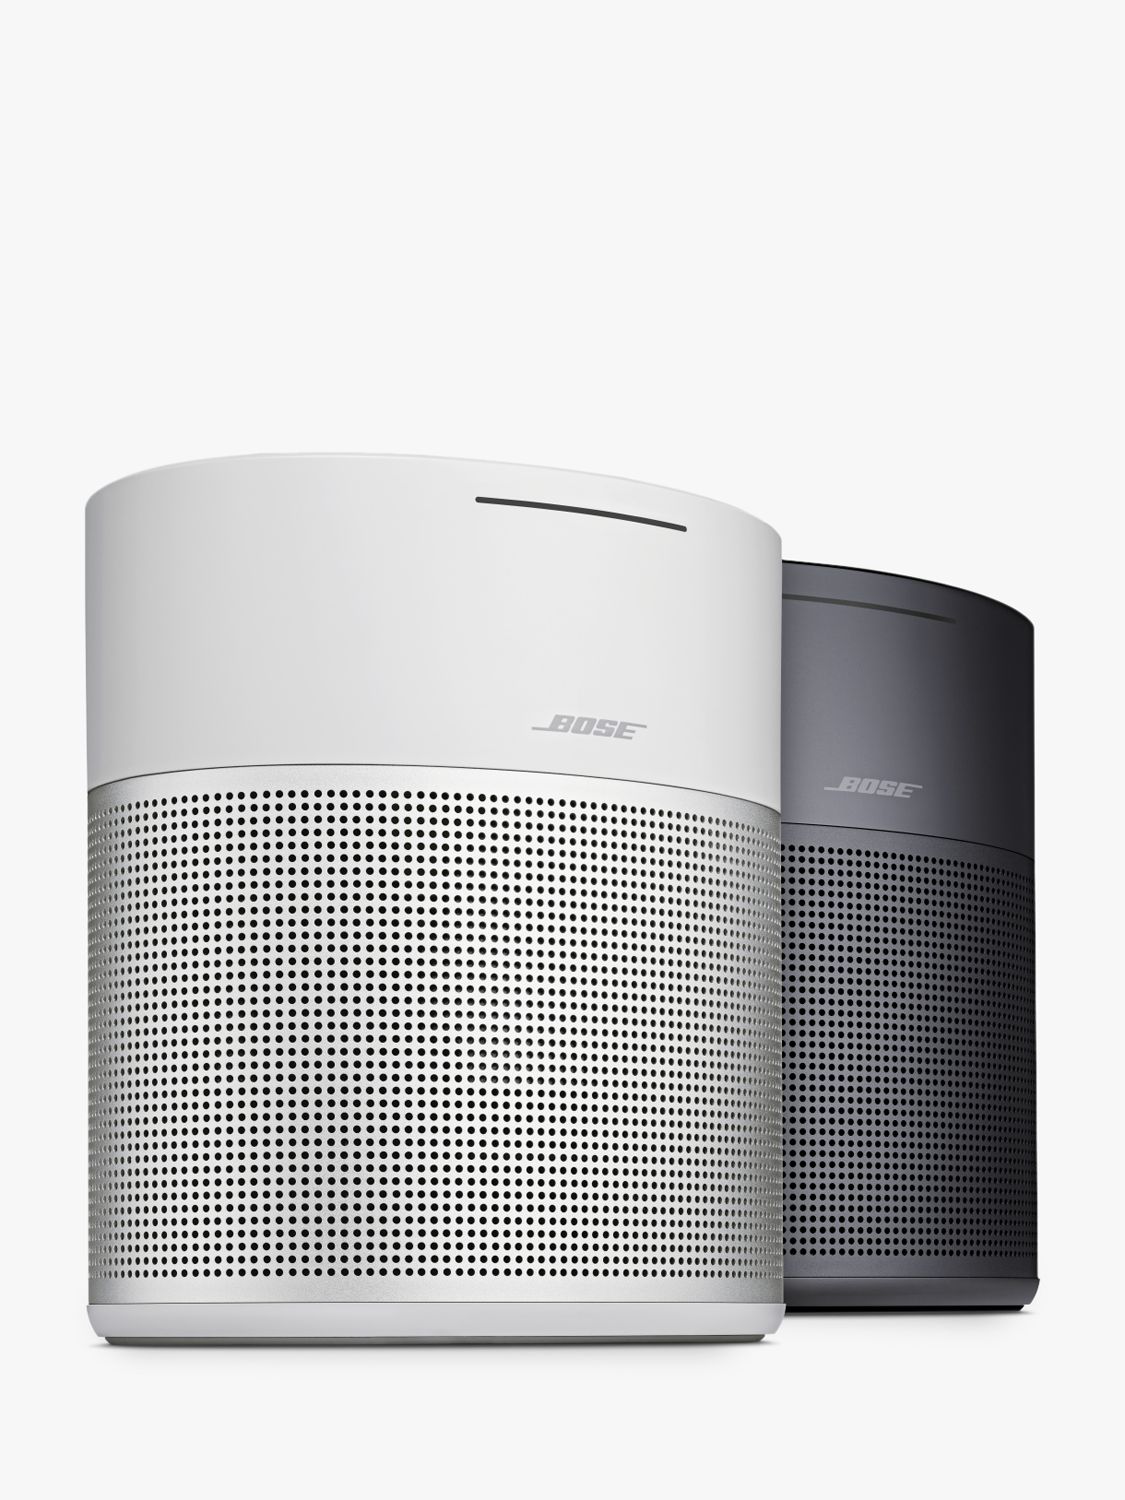 bose voice activated speaker